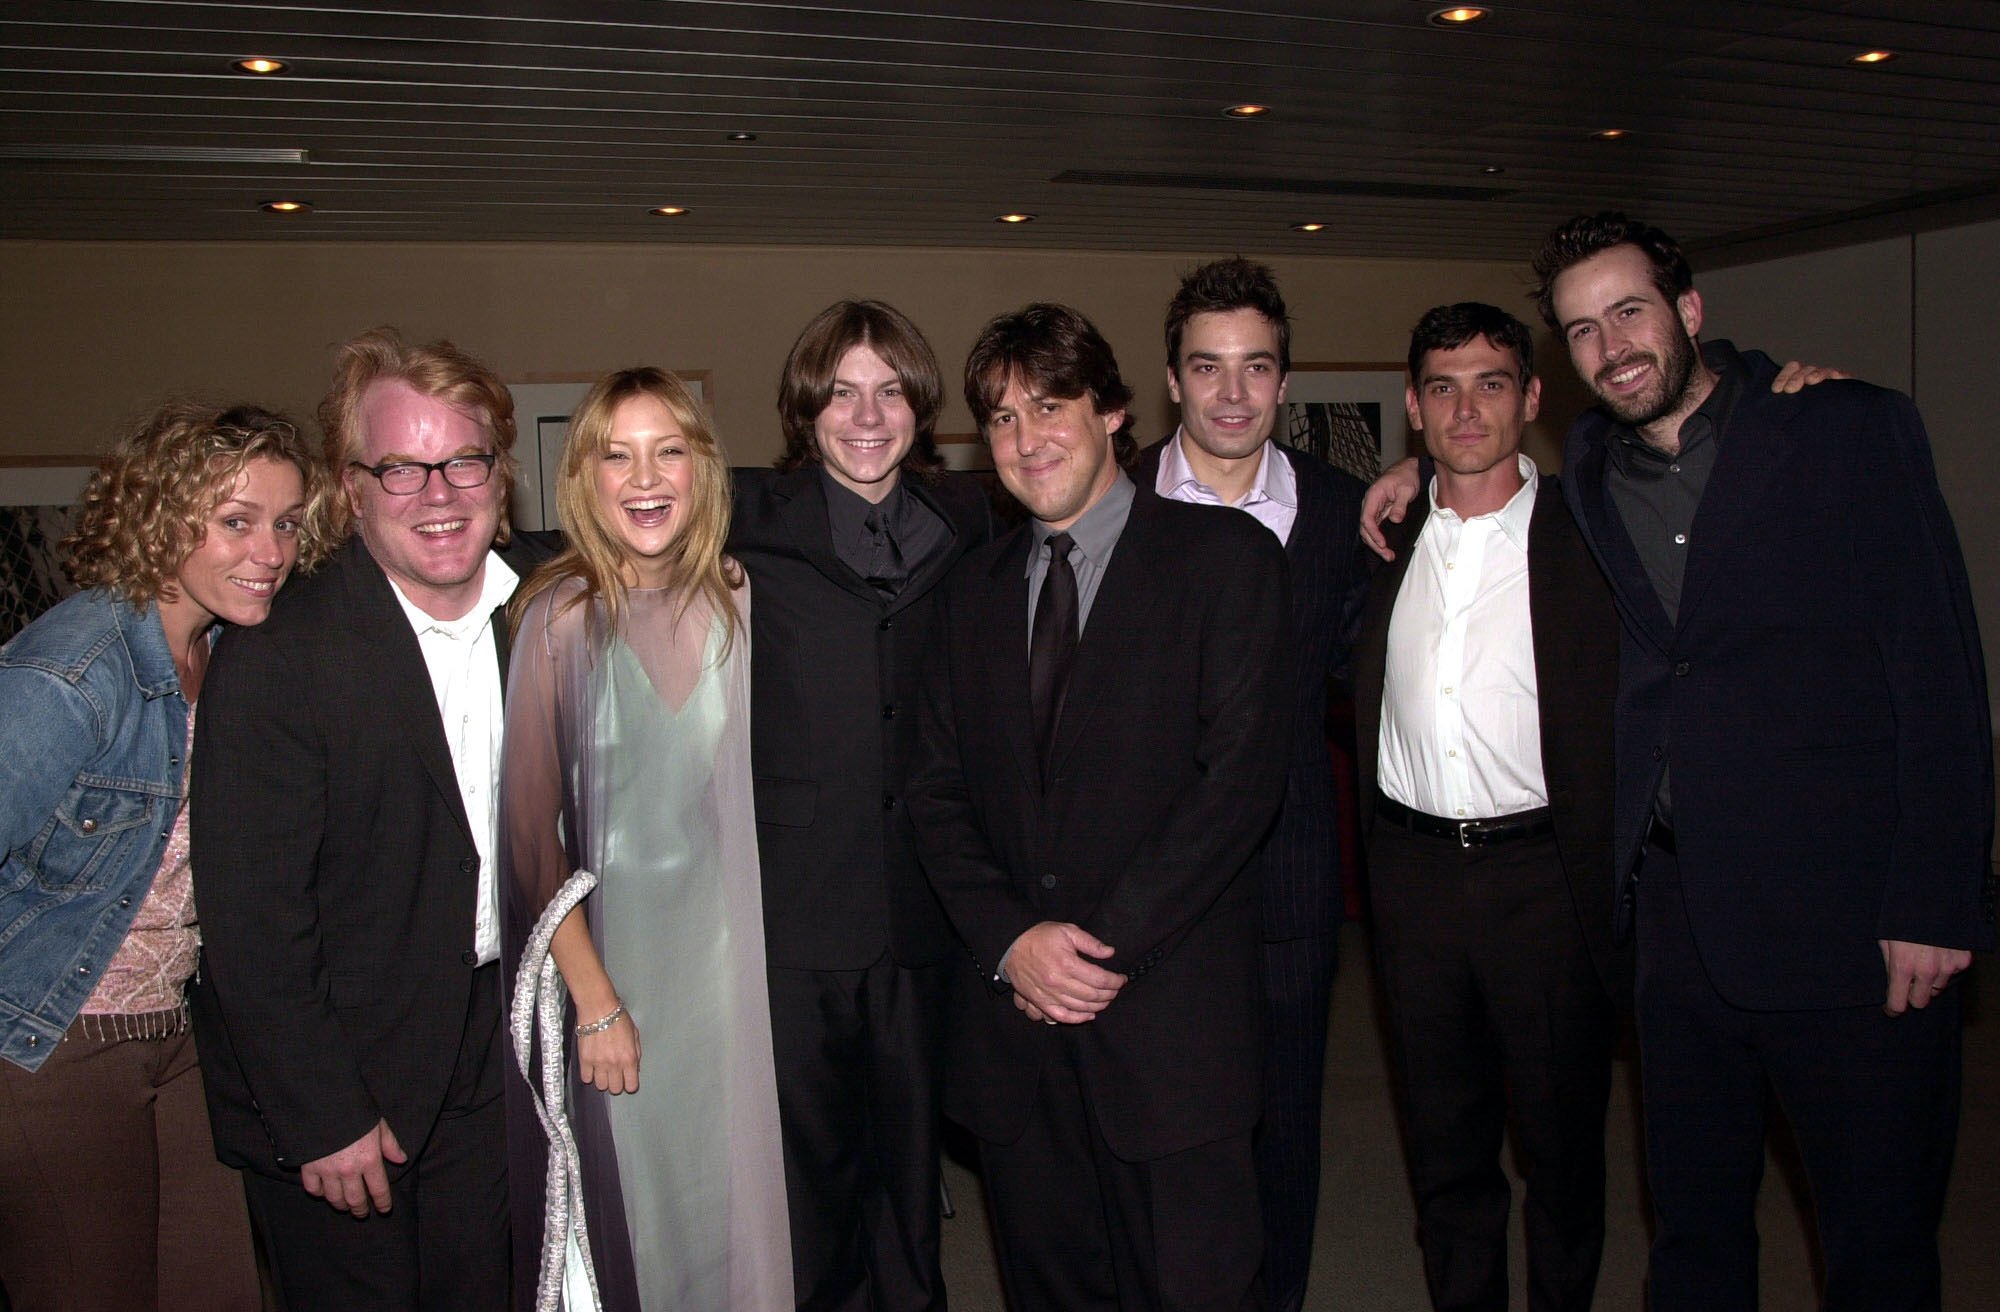 Almost Famous cast and crew smiling